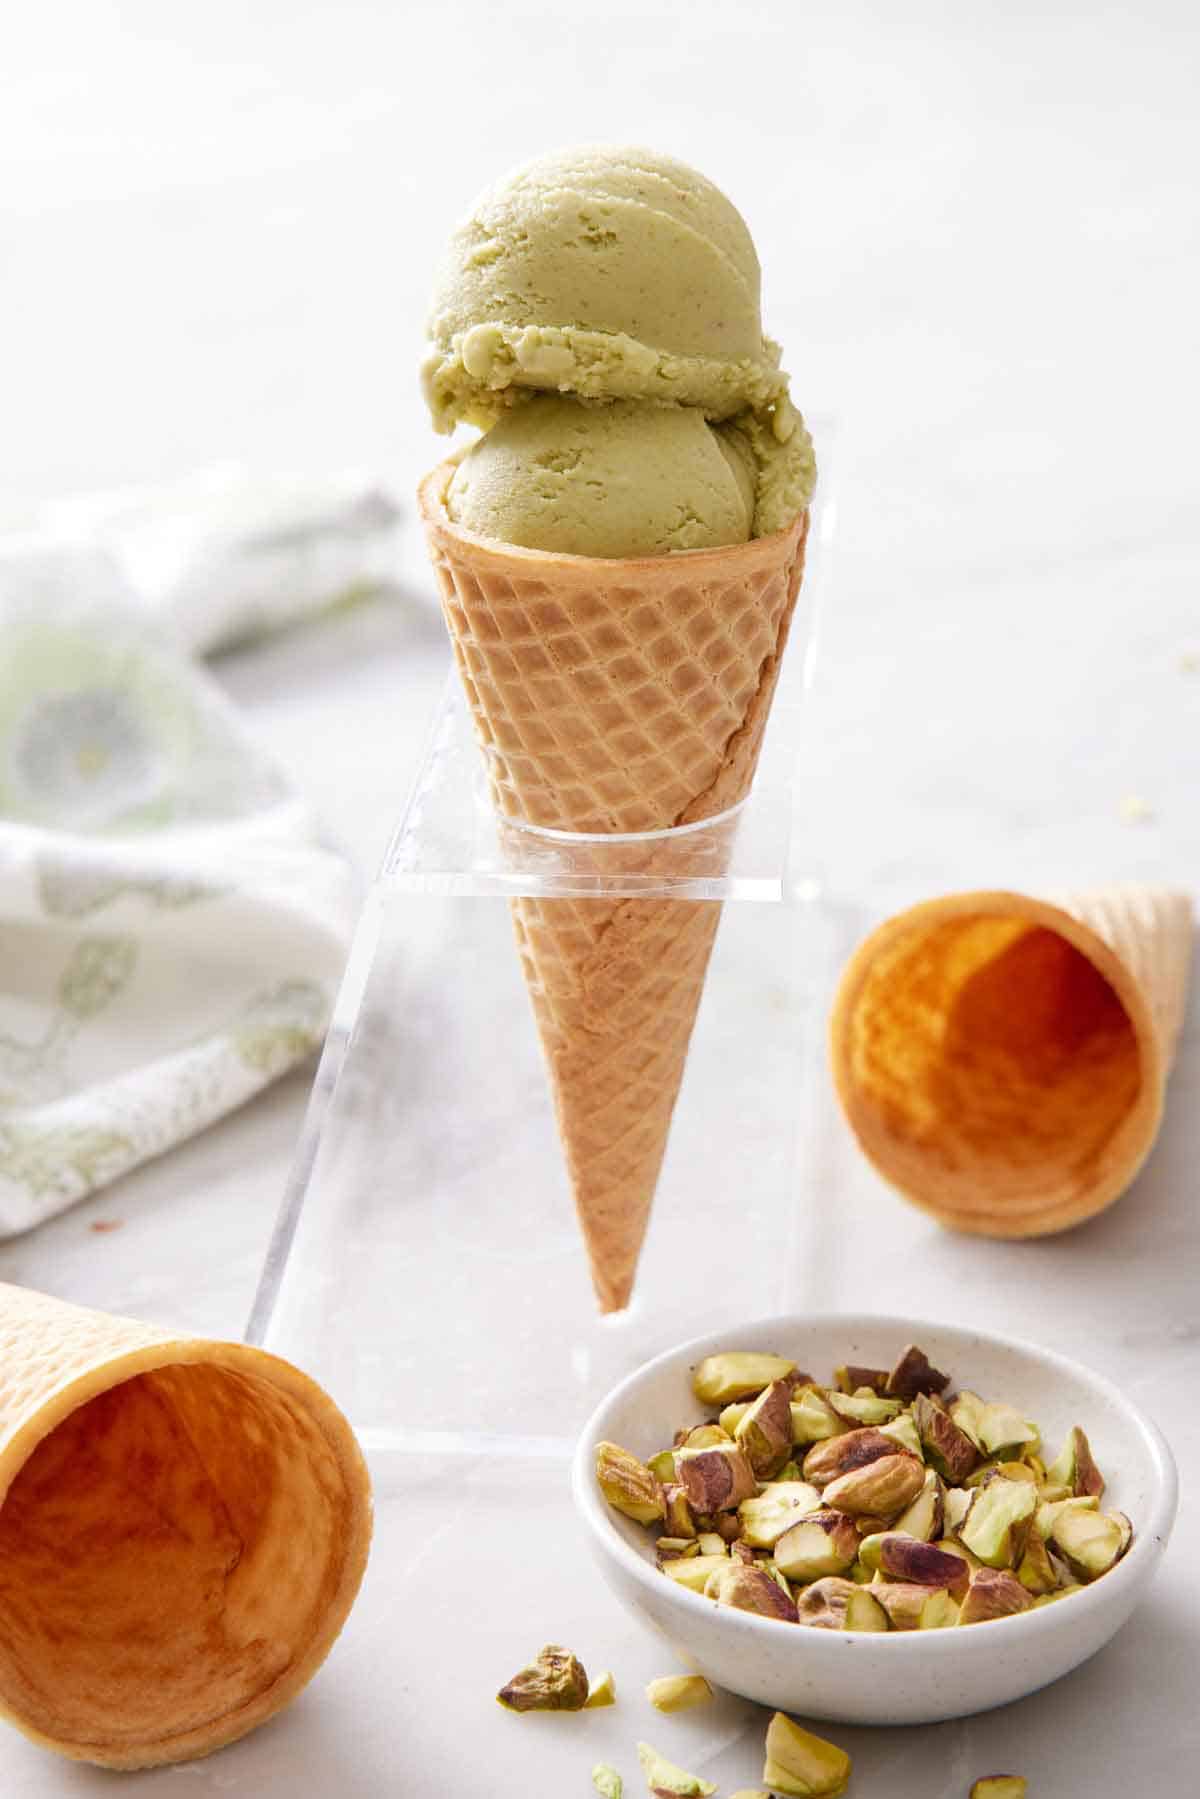 An ice cream cone with two scoops of pistachio ice cream. A bowl of pistachios in front with two cones scattered.